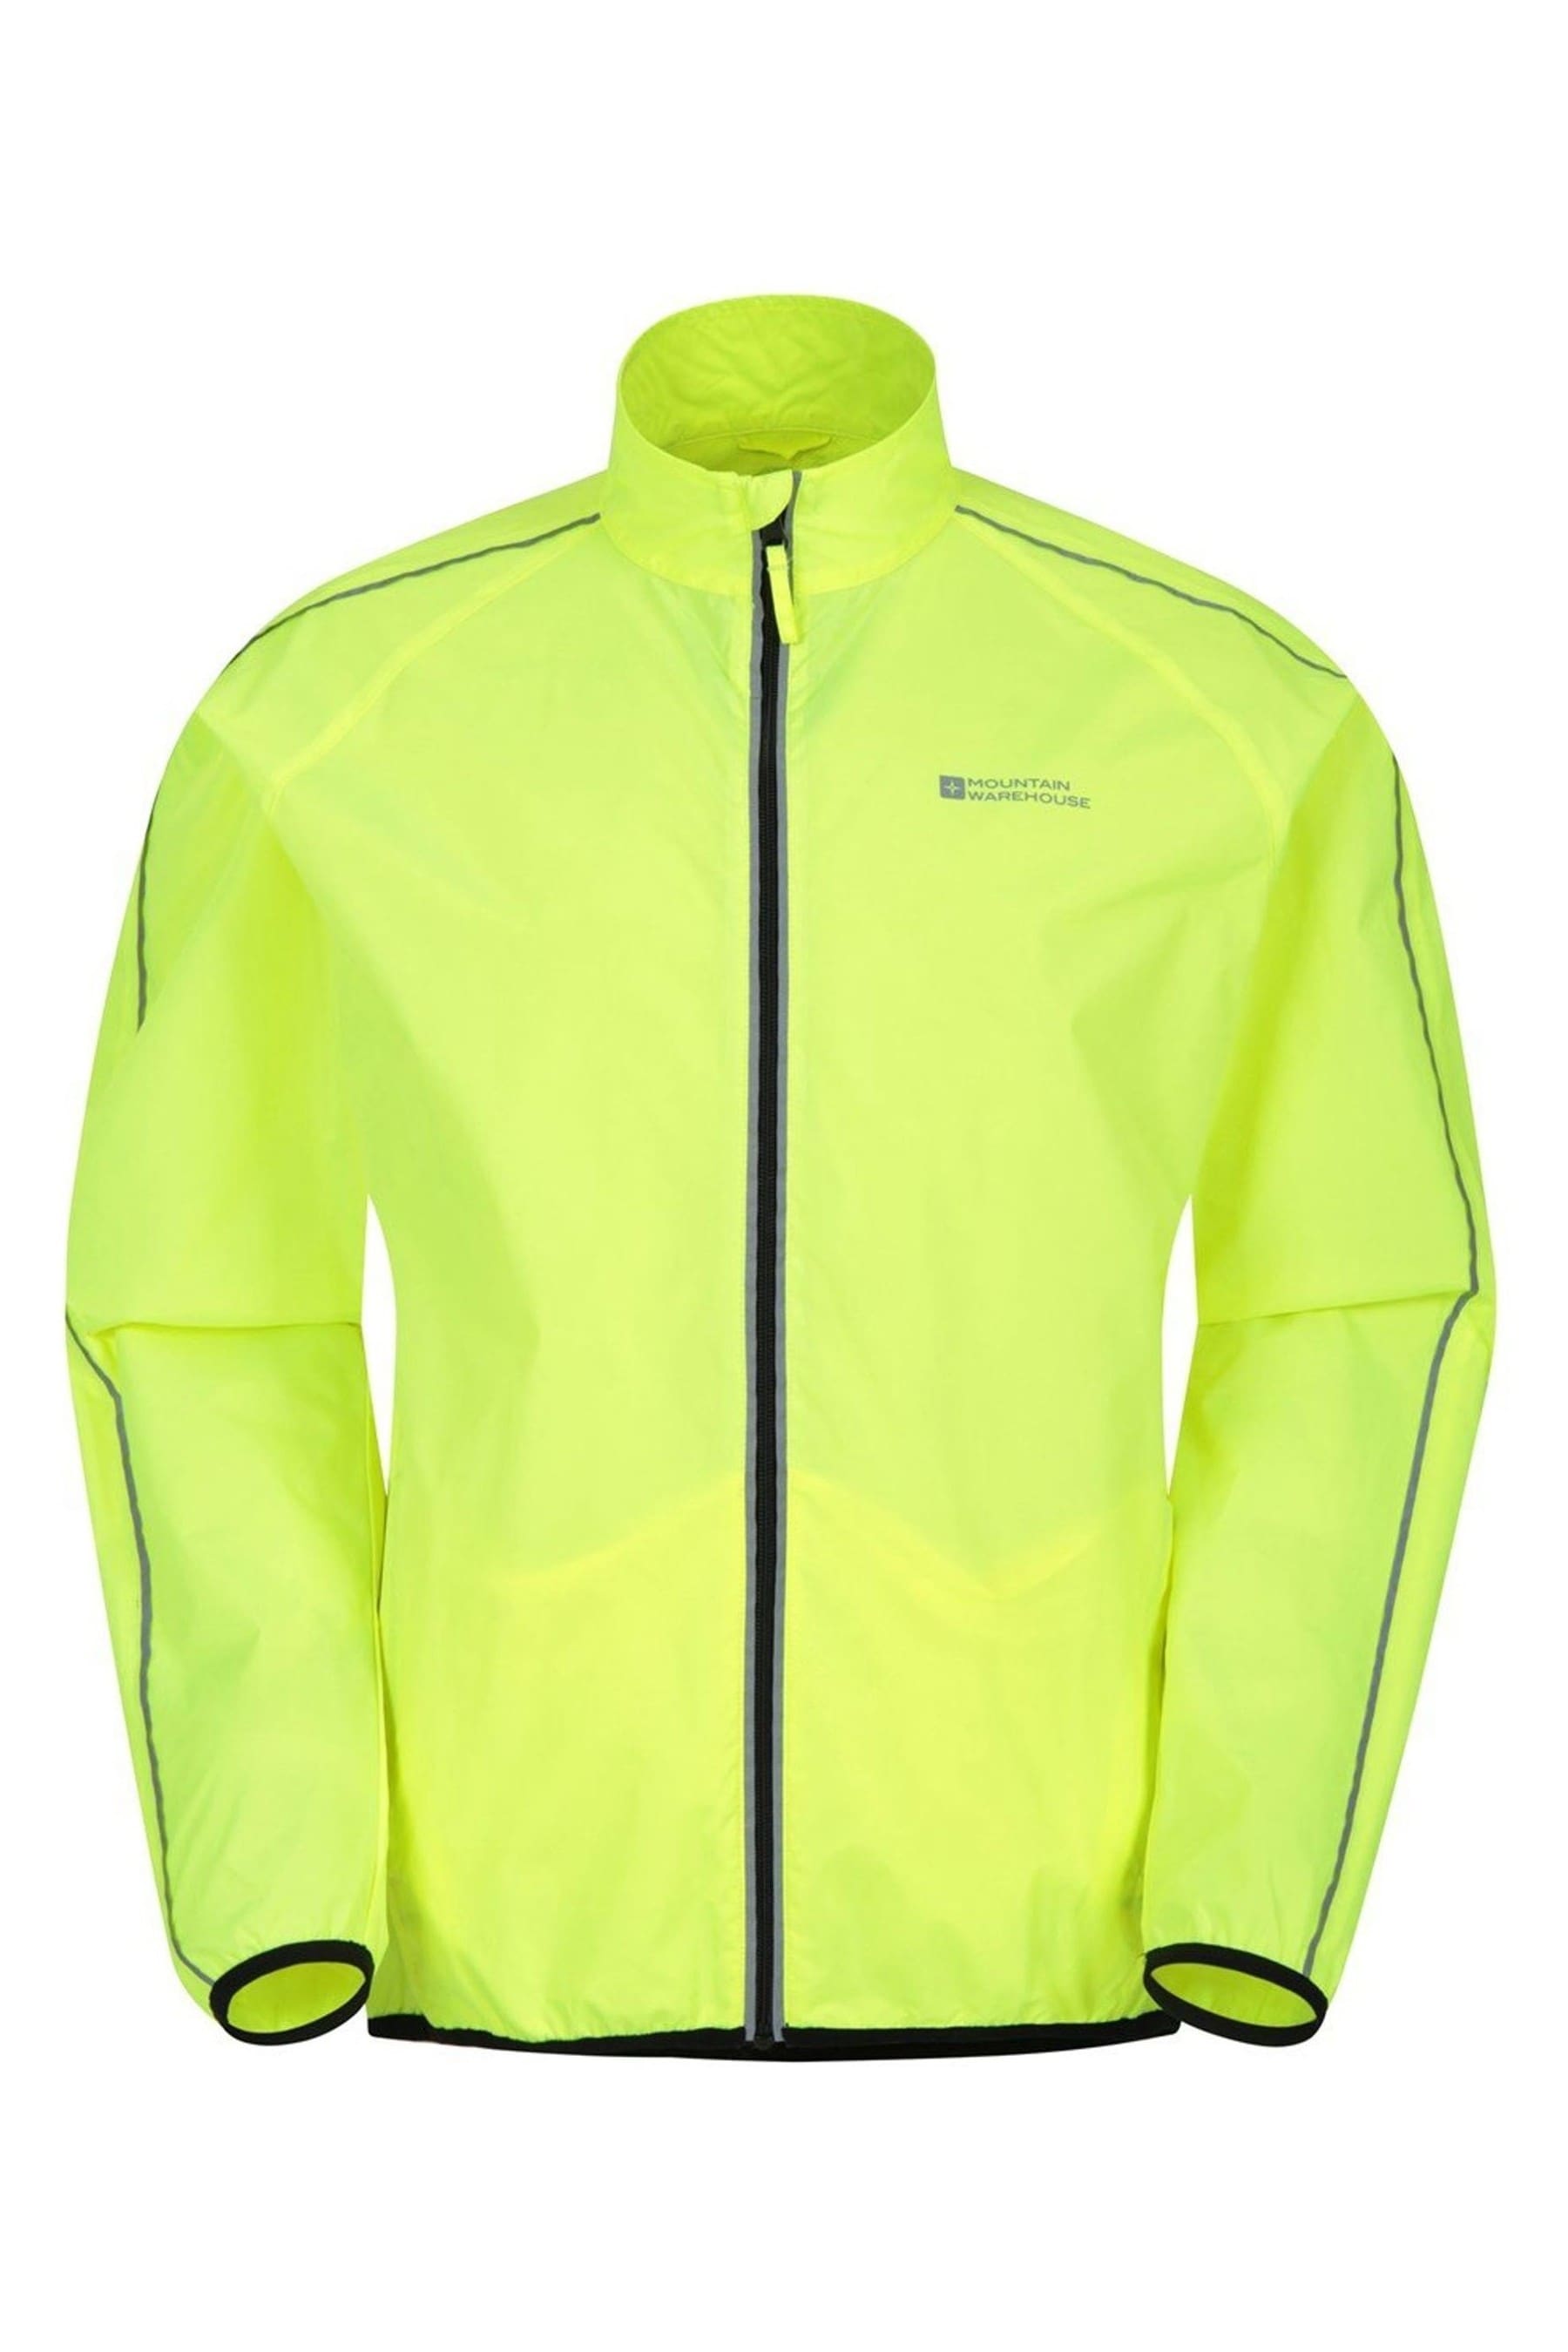 Buy Mountain Warehouse Yellow Force Mens Reflective Water-Resistant ...